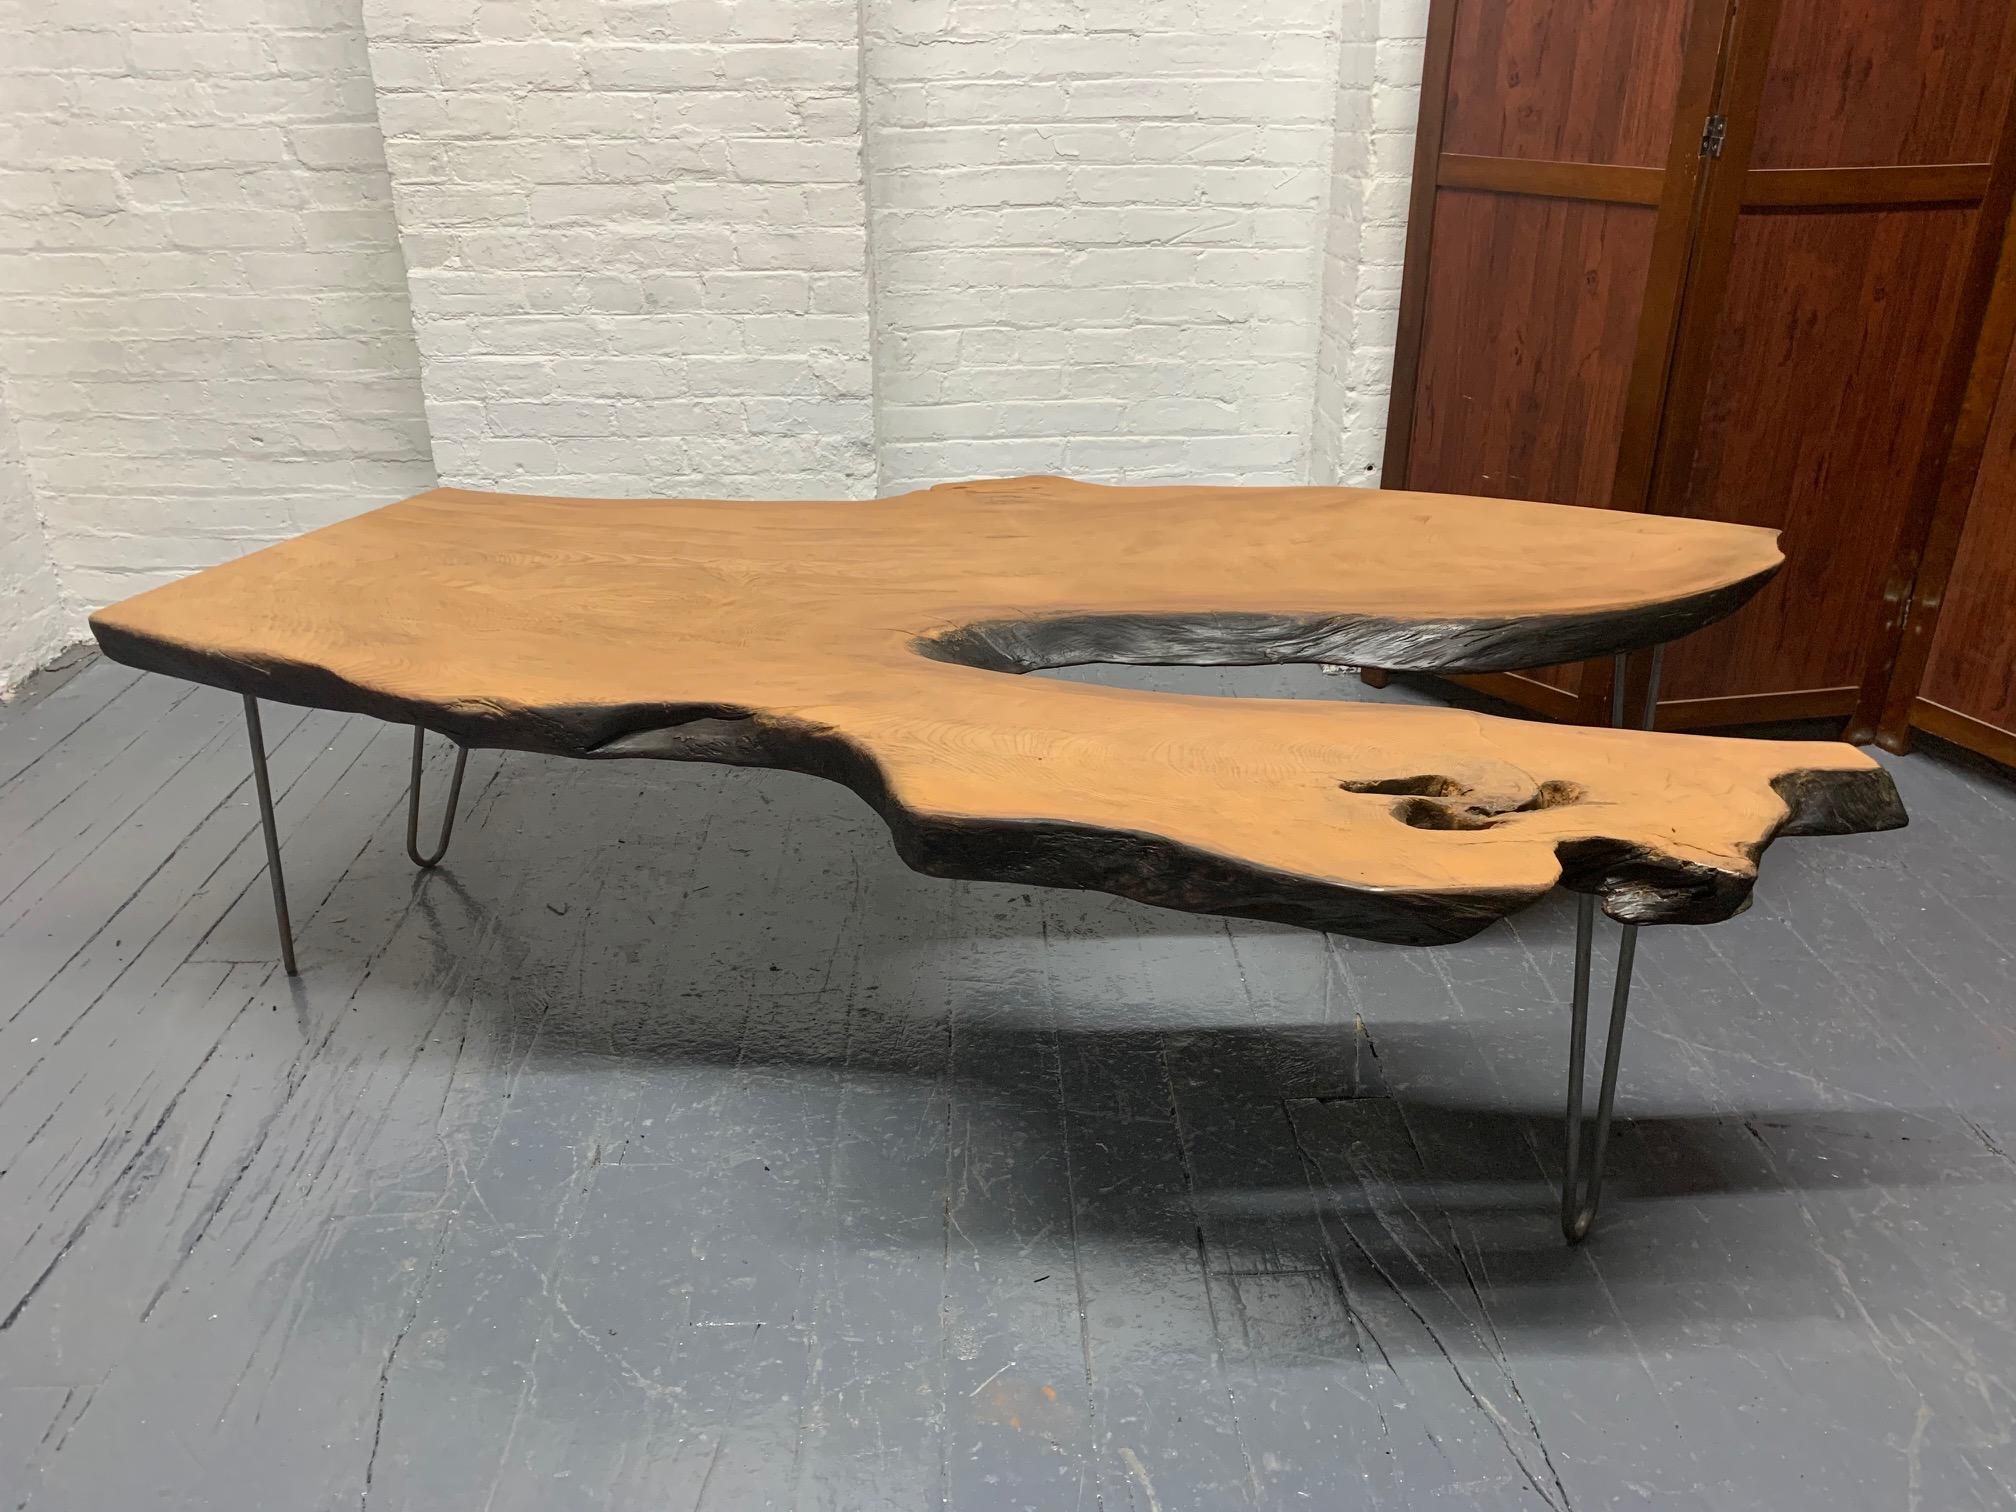 Large, organic, cherrywood live edge coffee table. Solid top with metal hairpin legs. Nakashima style.